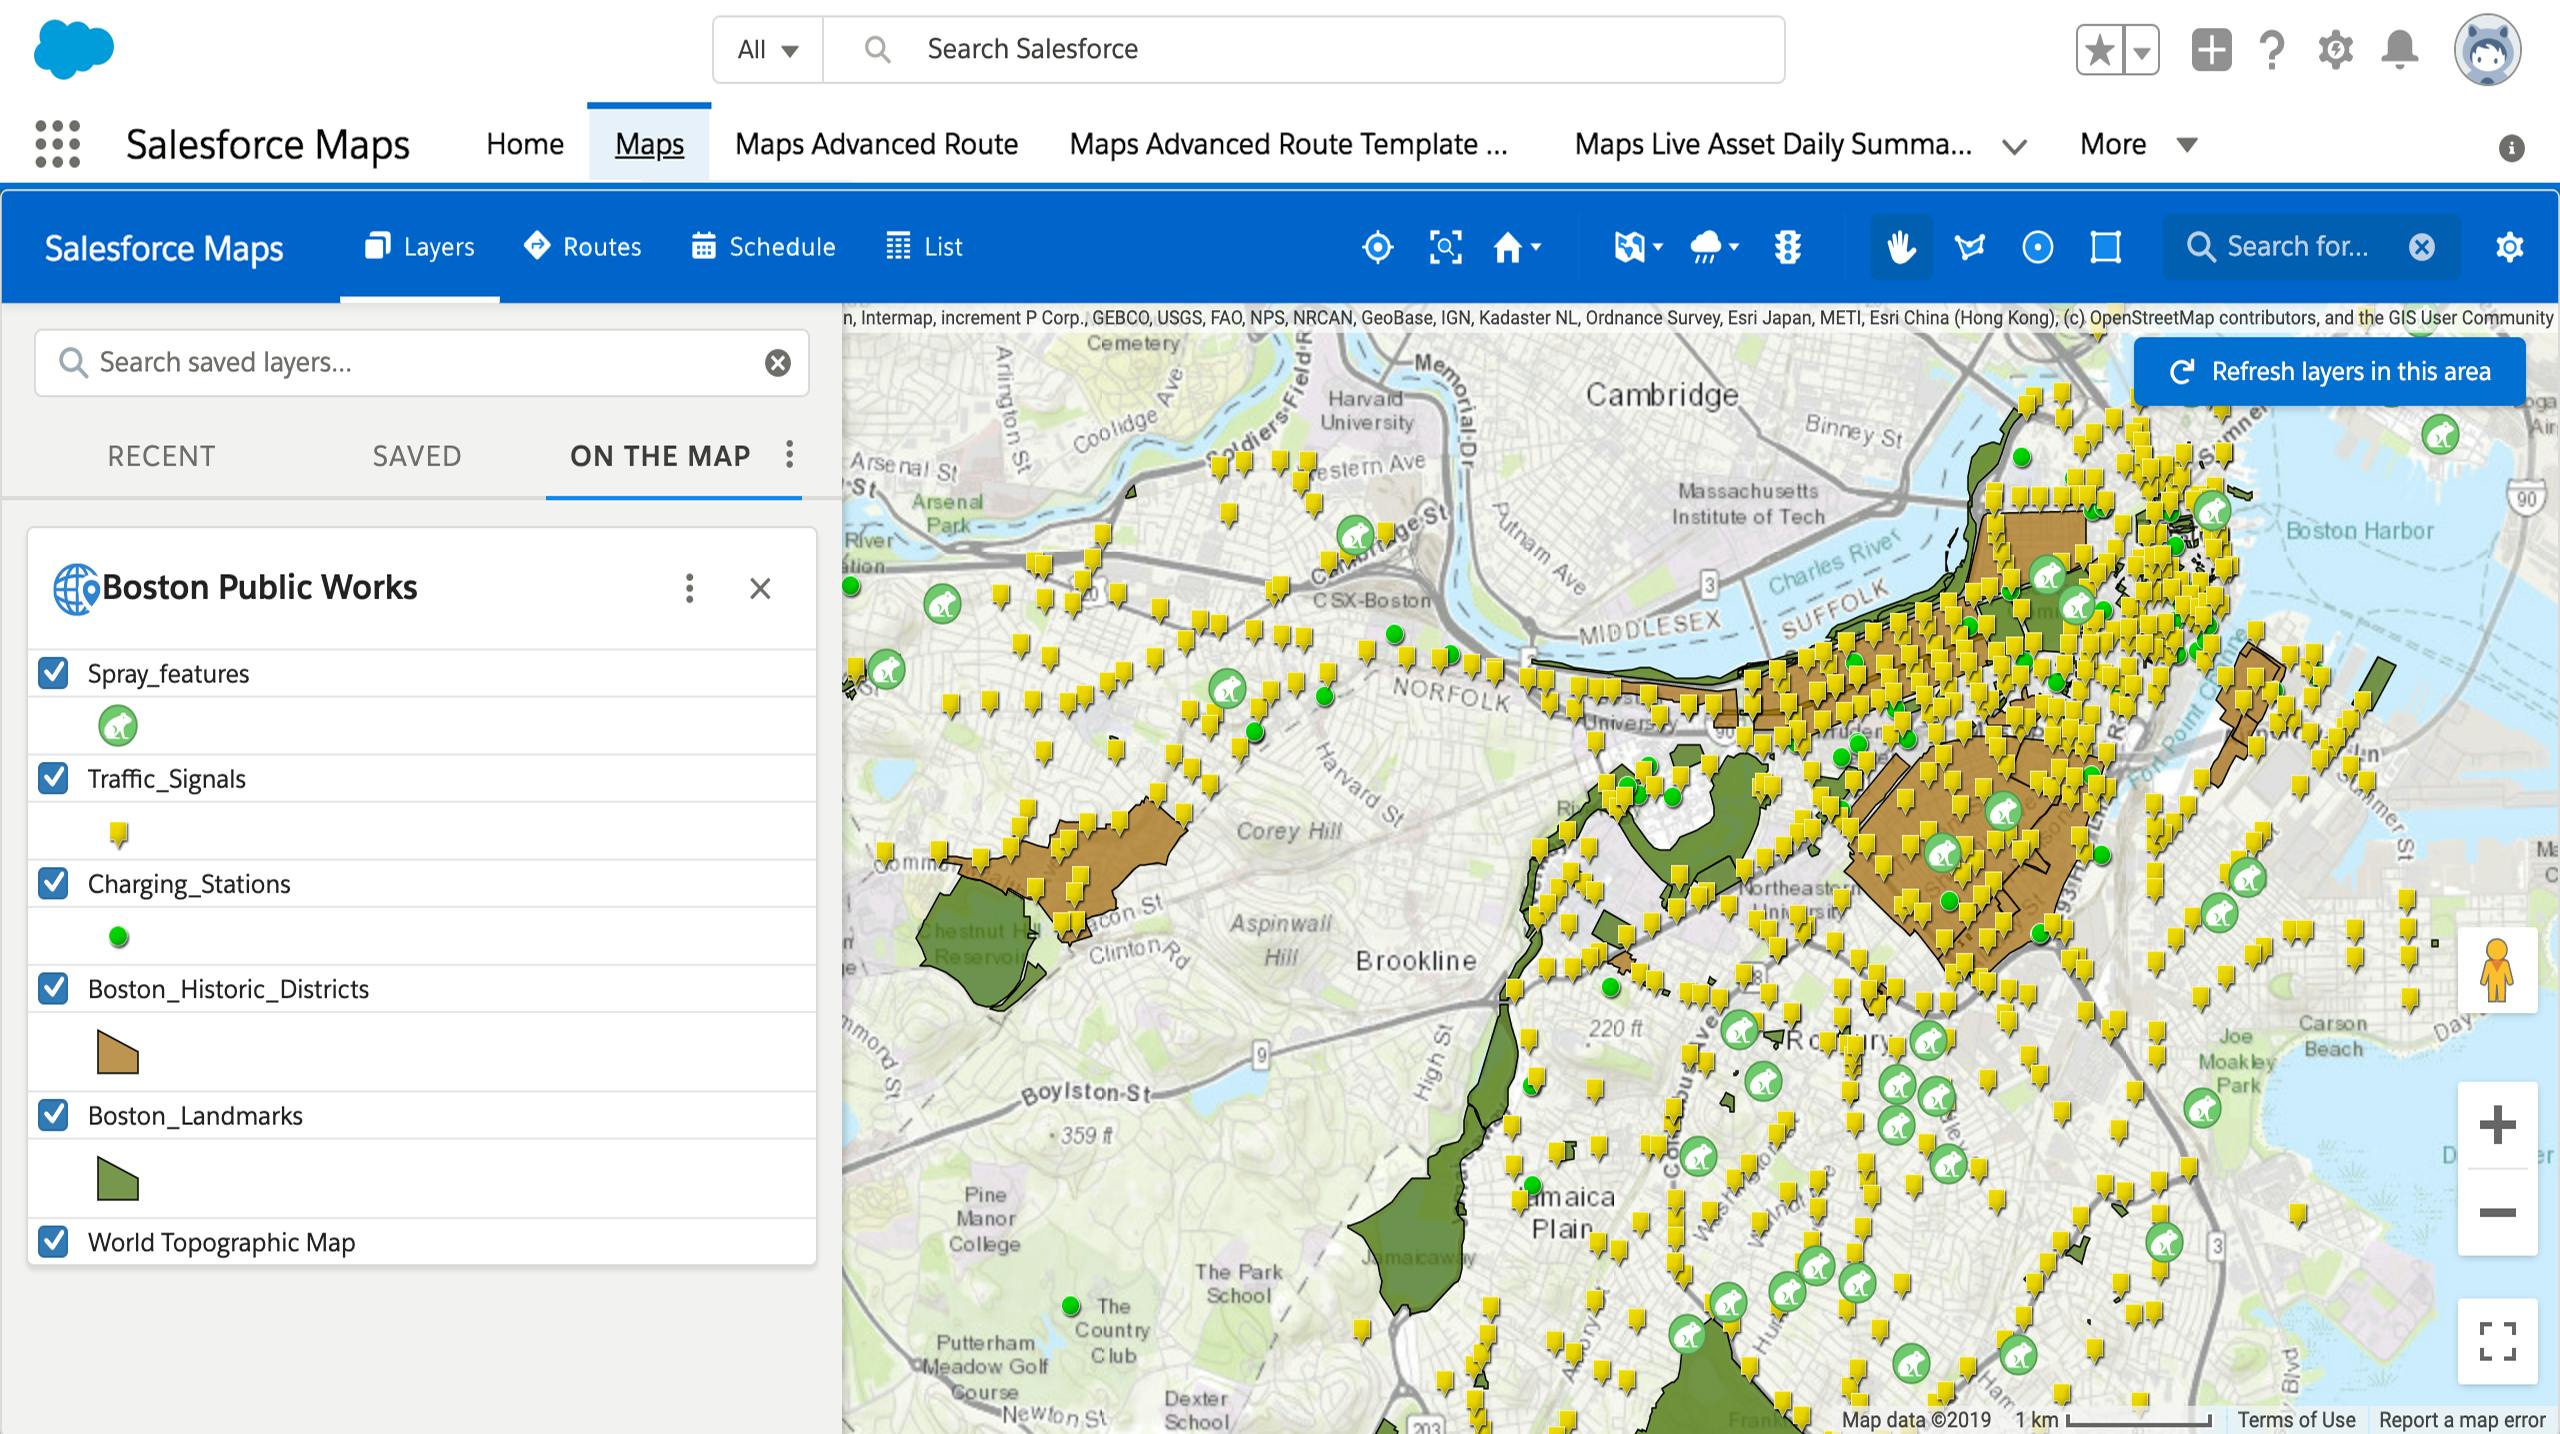 Turn Your ArcGIS Data Into Actionable Intelligence